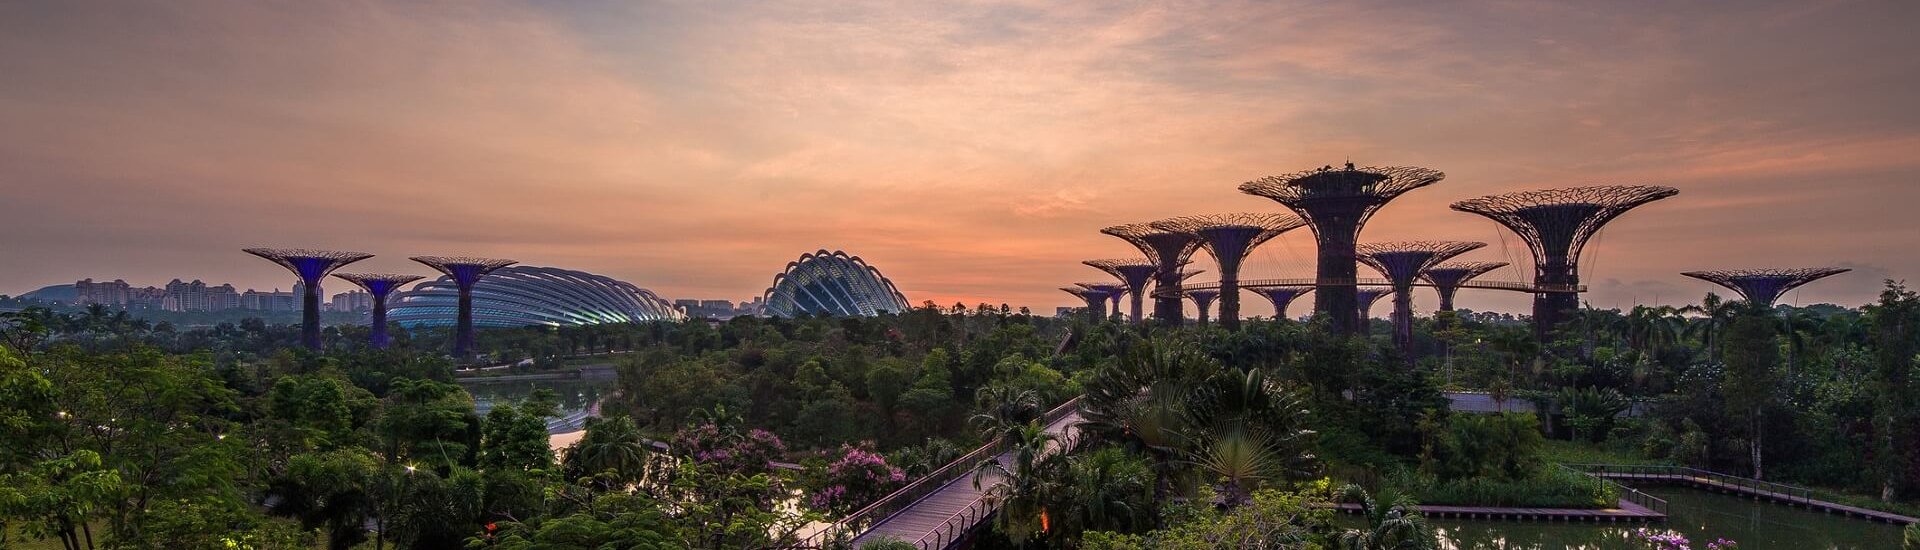 Singapore's Gardens By the Bay